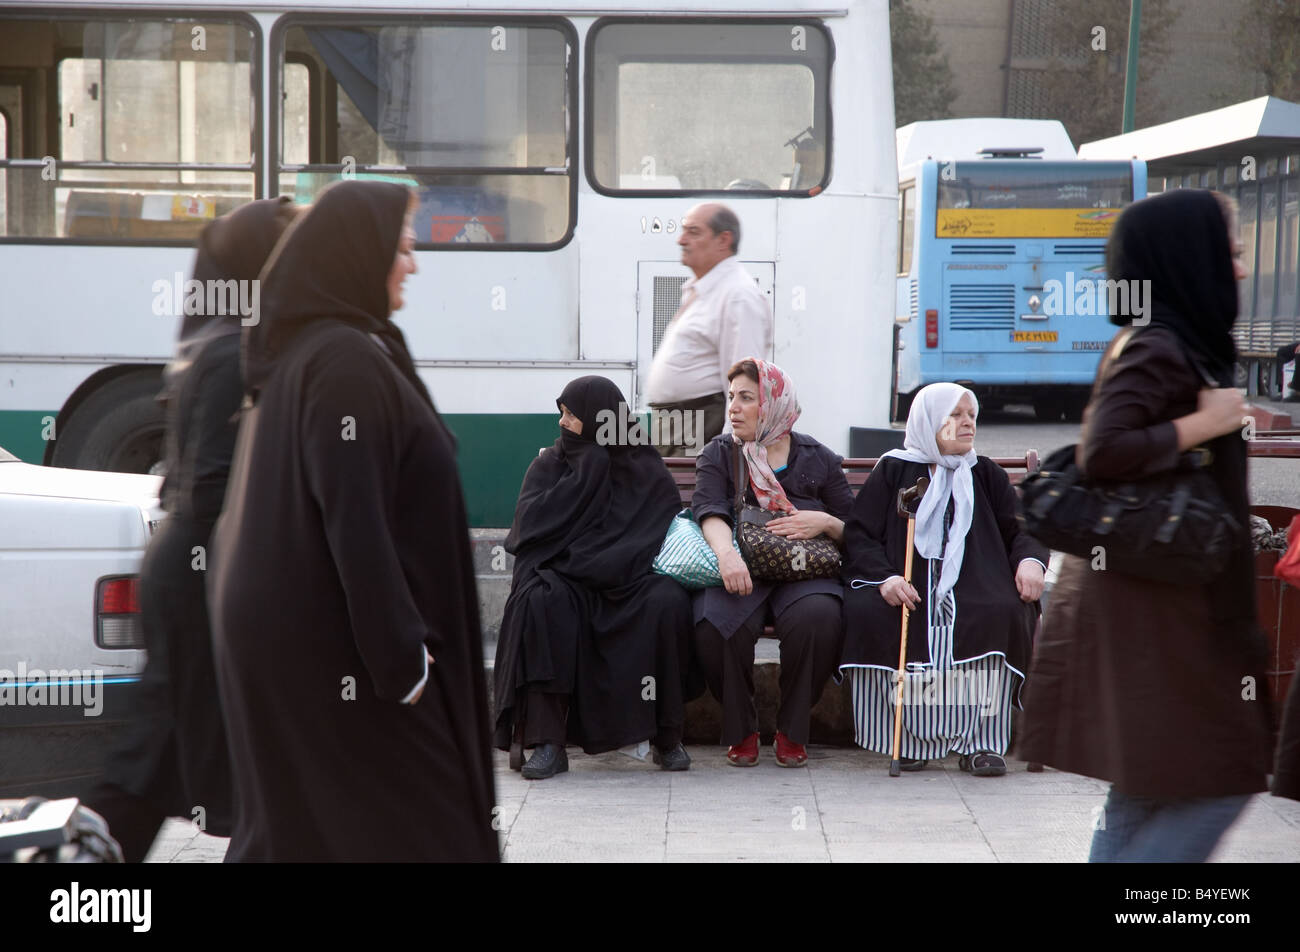 Three Women with different styles of outfits and Hijabs (Islamic dress) sitting on a bench in Tajrish, North of Tehran Stock Photo